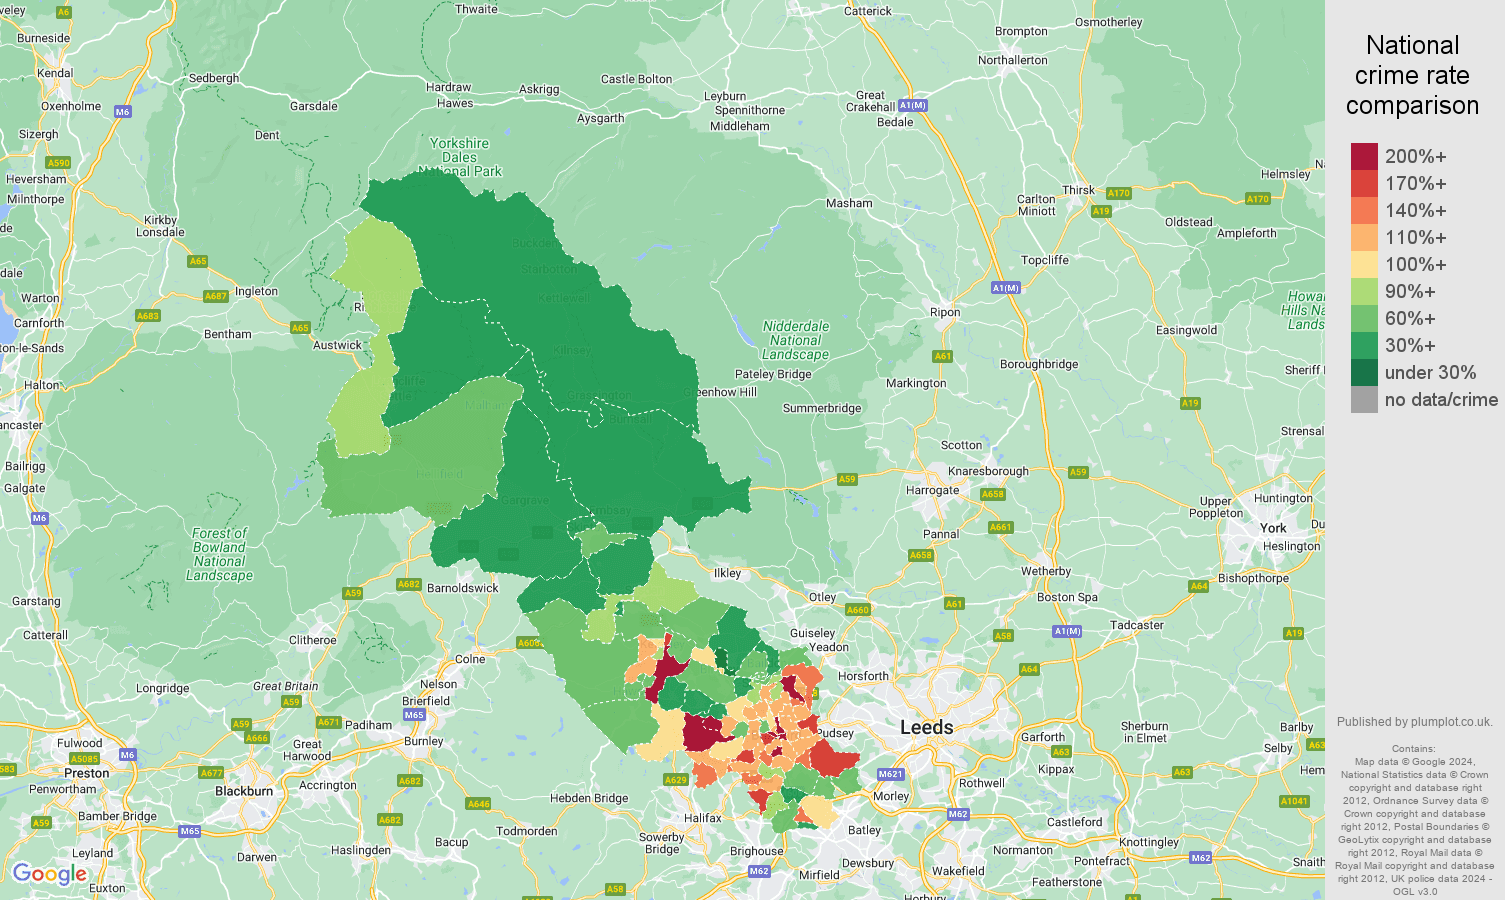 Bradford other theft crime rate comparison map